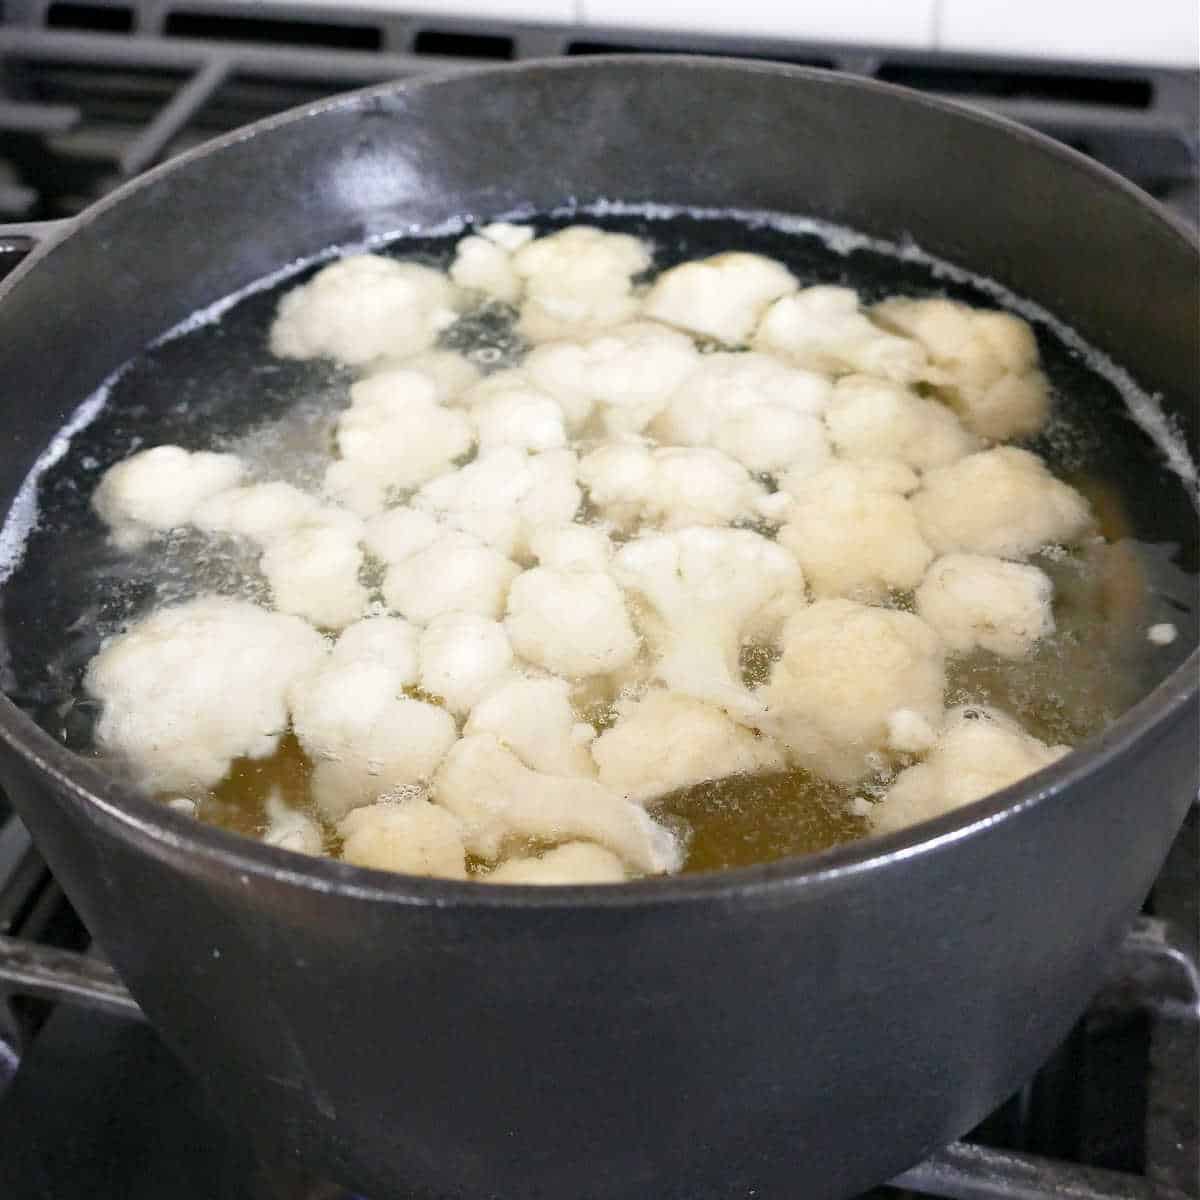 cauliflower and potatoes cooking in boiling water in a pot on the stove